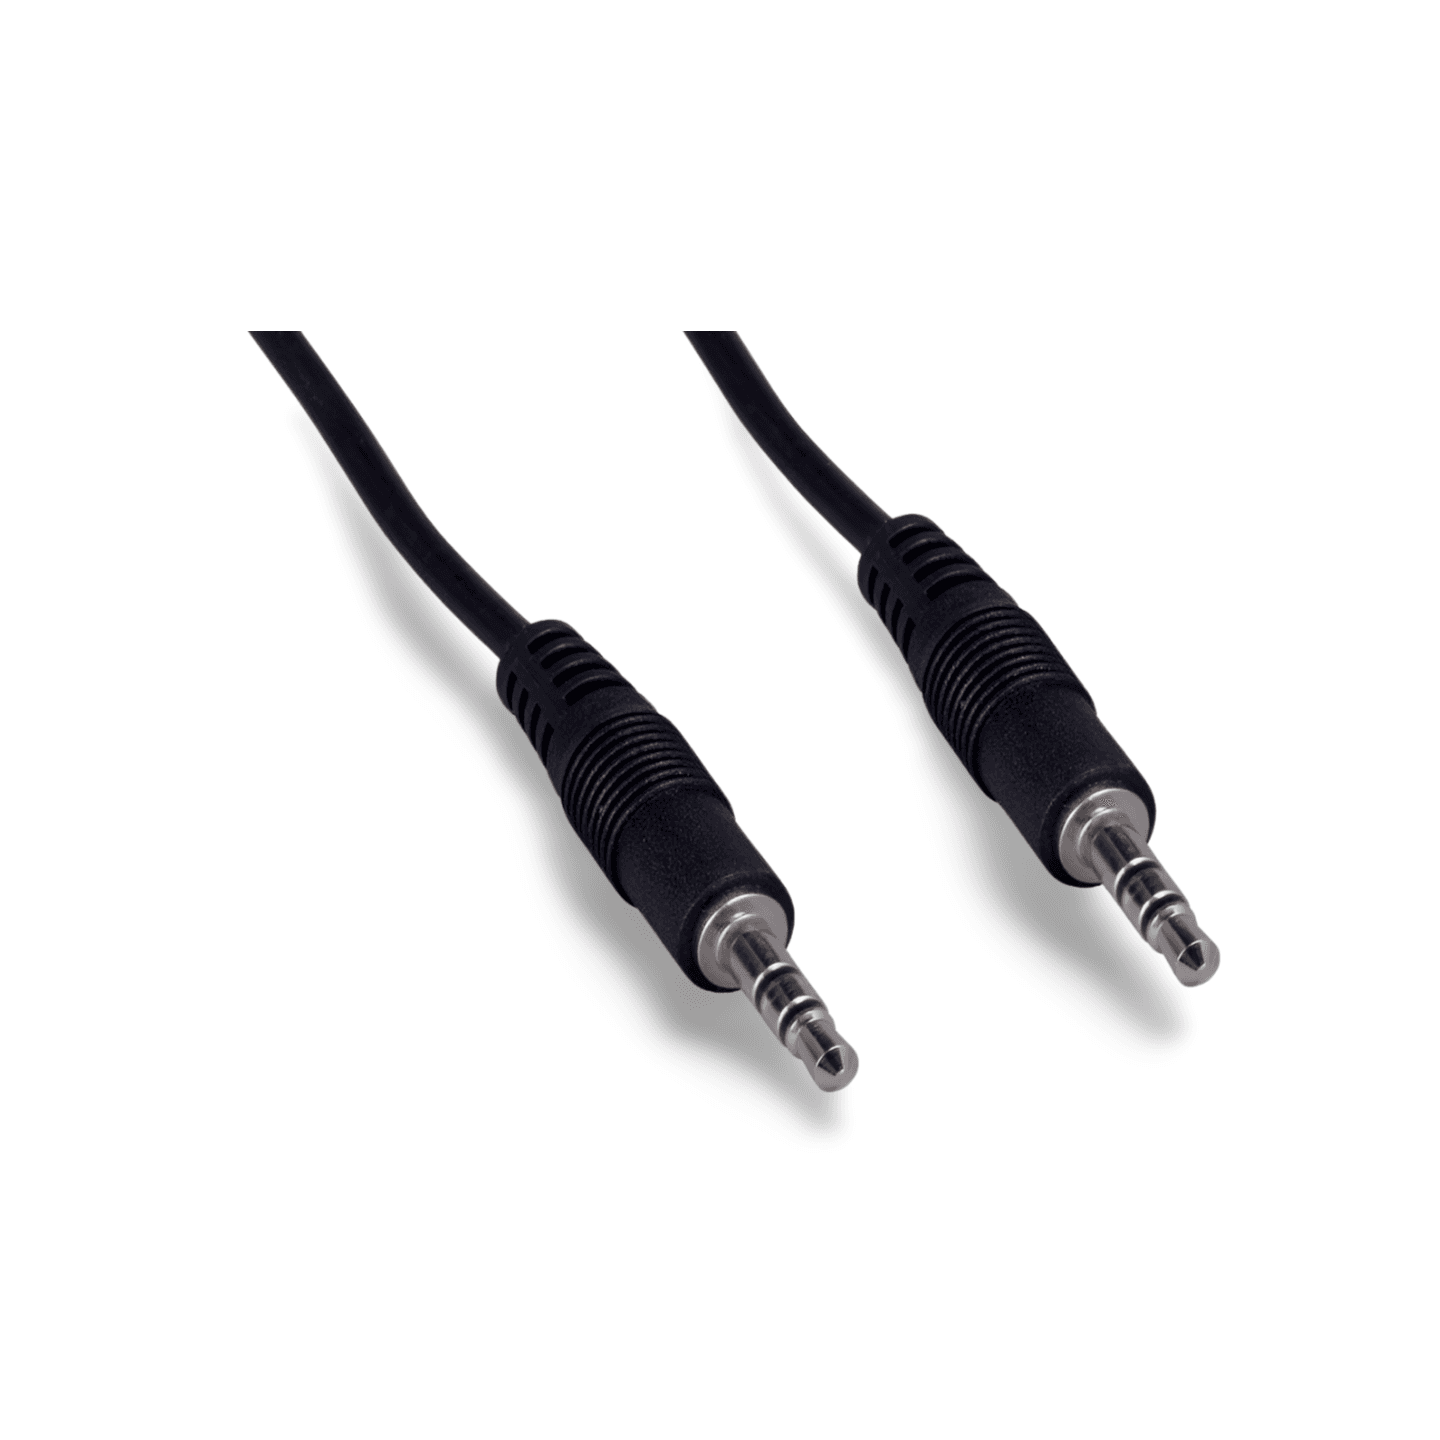 50ft 3.5mm Aux Cord Male to Male Stereo Audio Cable black